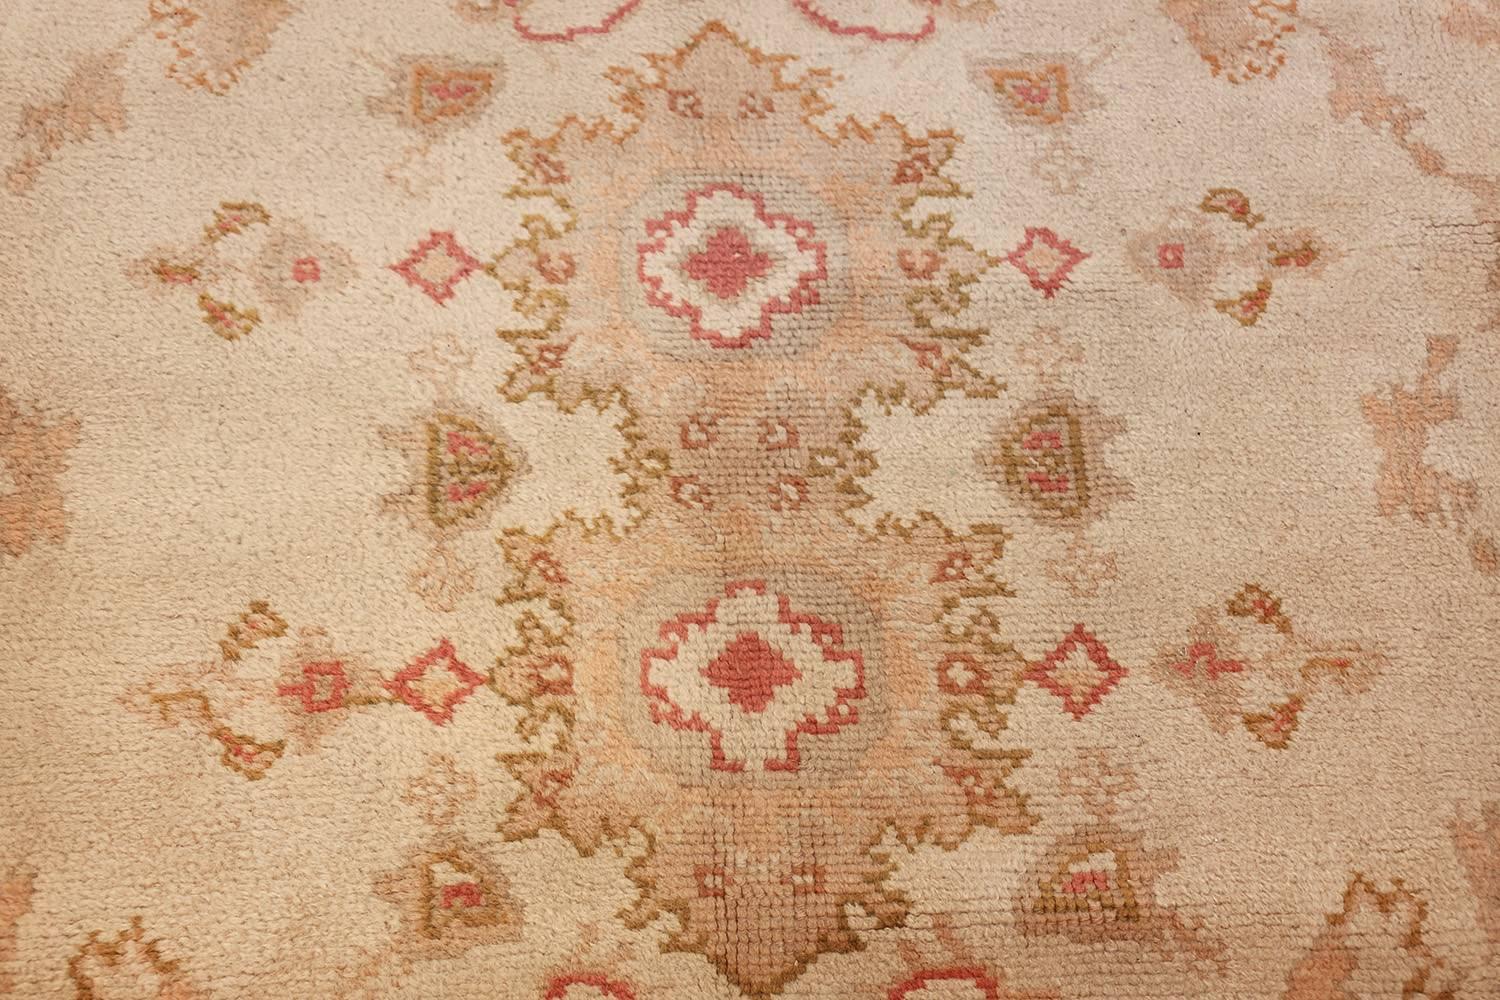 Beautiful and Soft Large Size Antique Turkish Oushak Rug, Country of Origin: Turkey, Circa Date: 1920. Size: 15 ft x 18 ft 6 in (4.57 m x 5.64 m)

Whimsical patterns and light, airy colors define this antique Oushak rug. The viewer is immediately